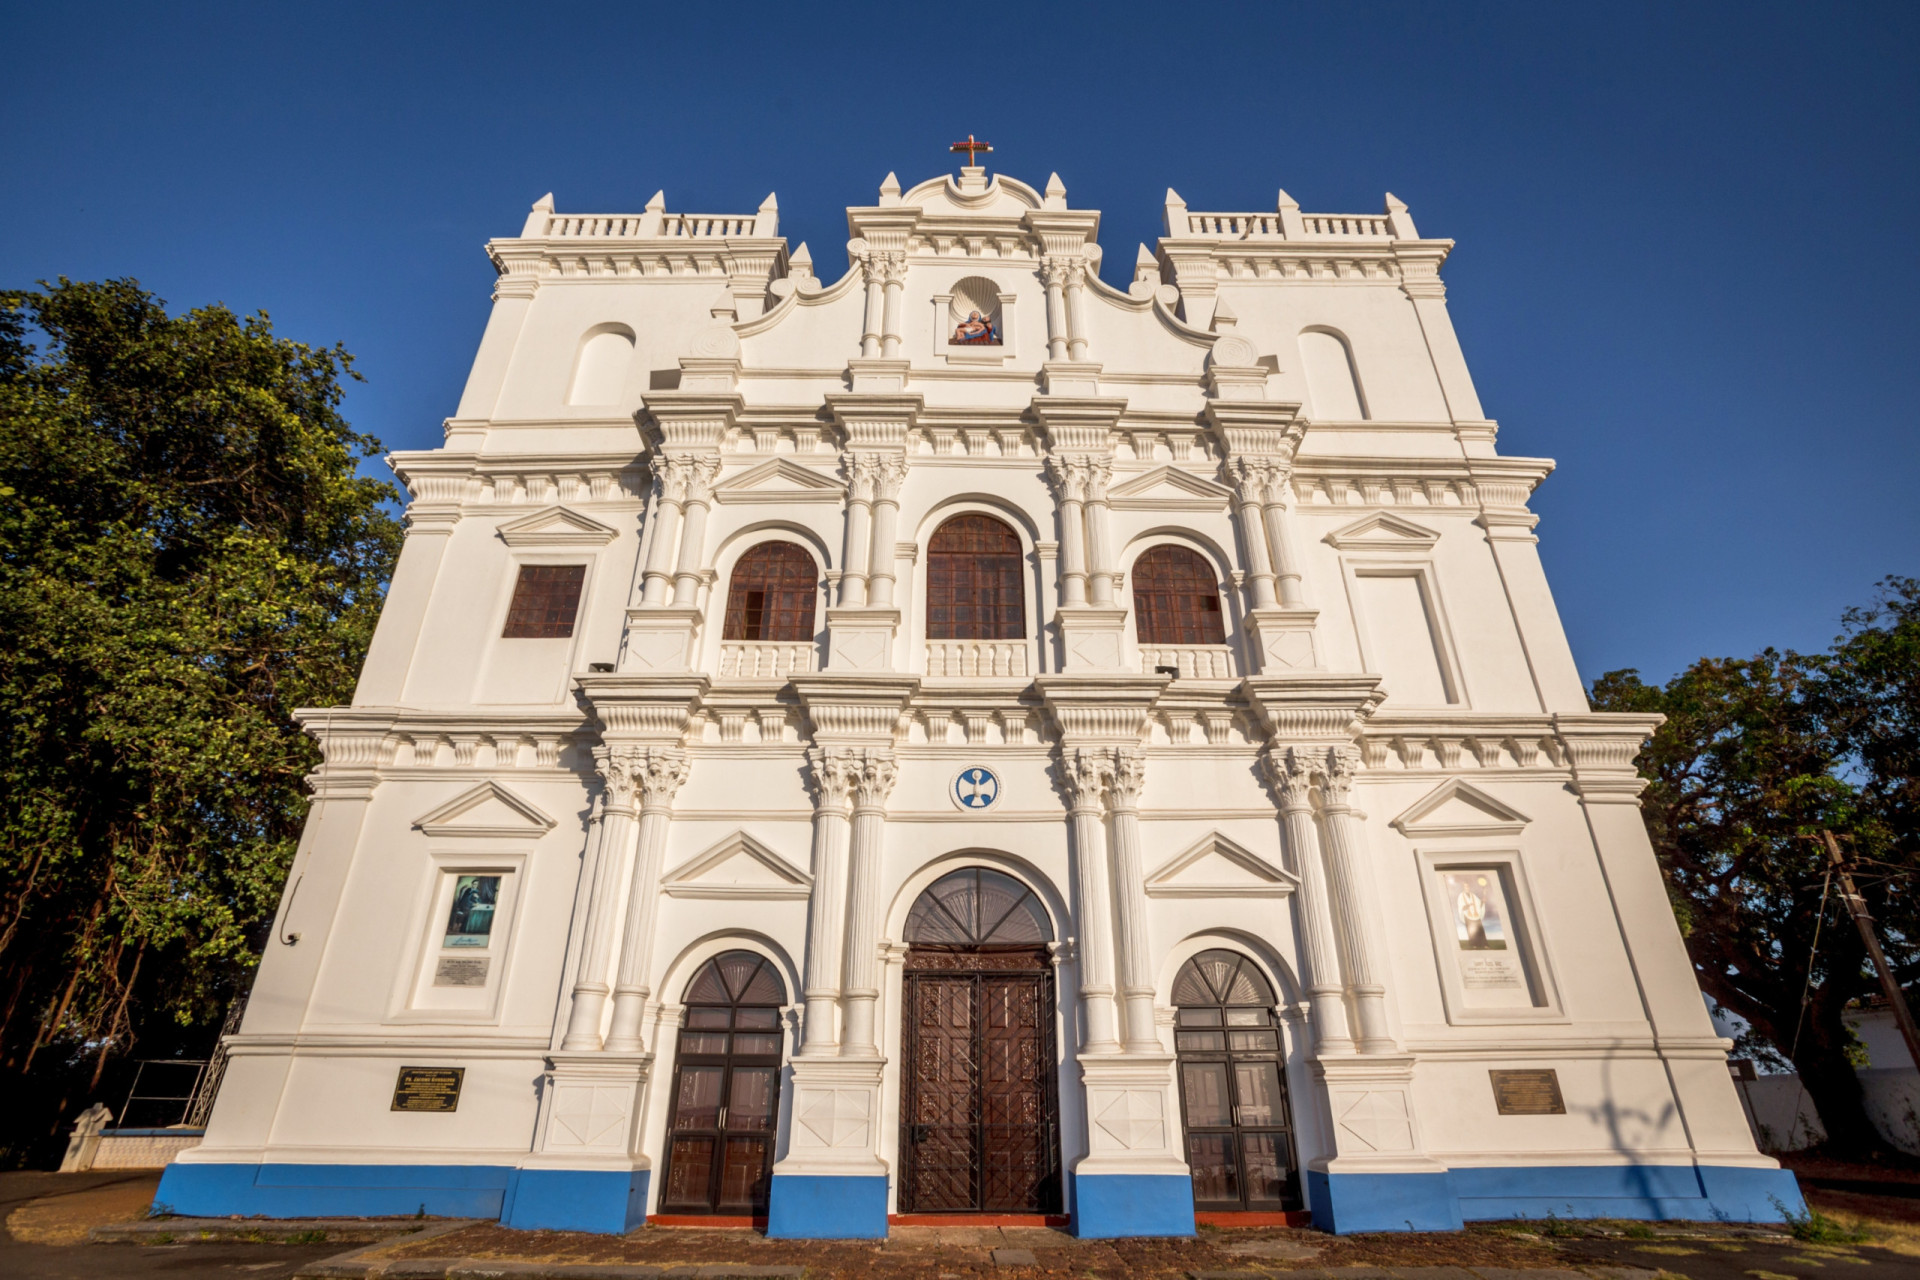 <p>Similarly, historic Indo-Portuguese architecture characterizes Divar Island in Goa. For example, the village of Piedade, which means "pity" or "compassion" in Portuguese, is where the early 18th-century Church of Our Lady of Compassion is located.</p><p><a href="https://www.msn.com/en-nz/community/channel/vid-7xx8mnucu55yw63we9va2gwr7uihbxwc68fxqp25x6tg4ftibpra?cvid=94631541bc0f4f89bfd59158d696ad7e">Follow us and access great exclusive content every day</a></p>